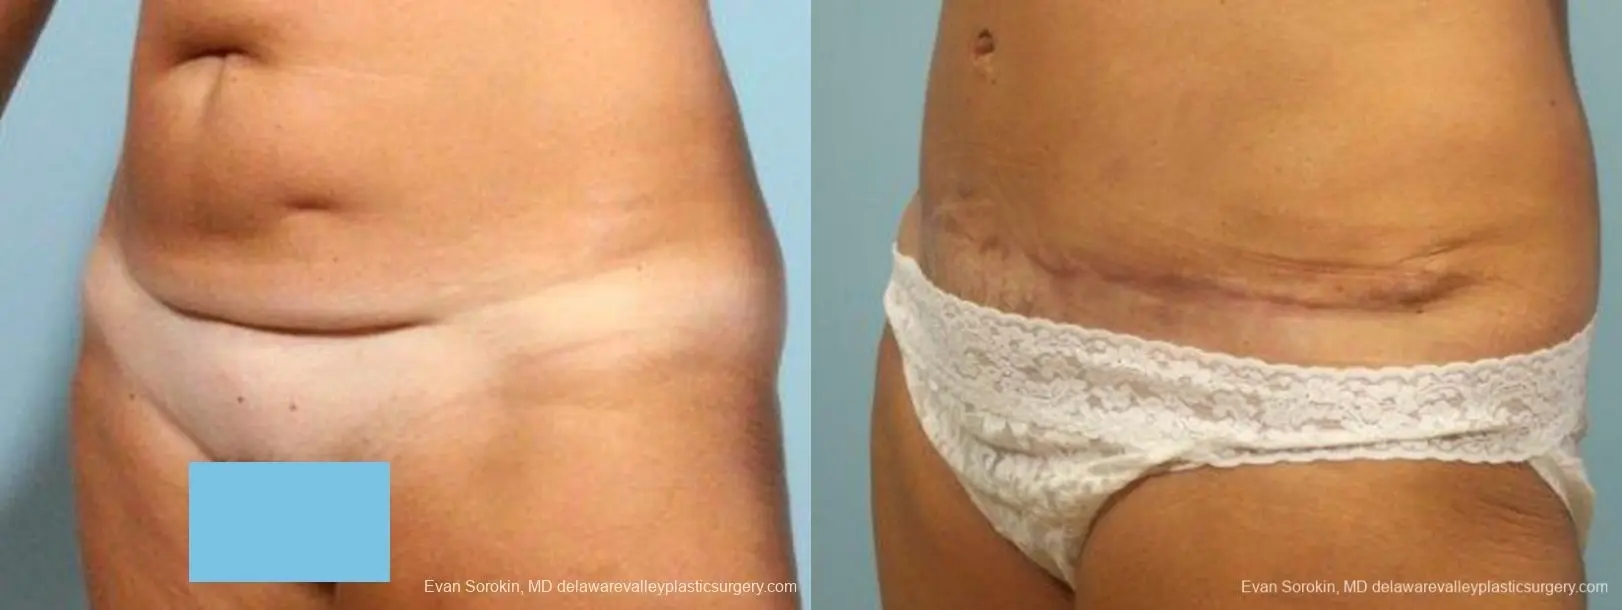 Philadelphia Abdominoplasty 9464 - Before and After 4